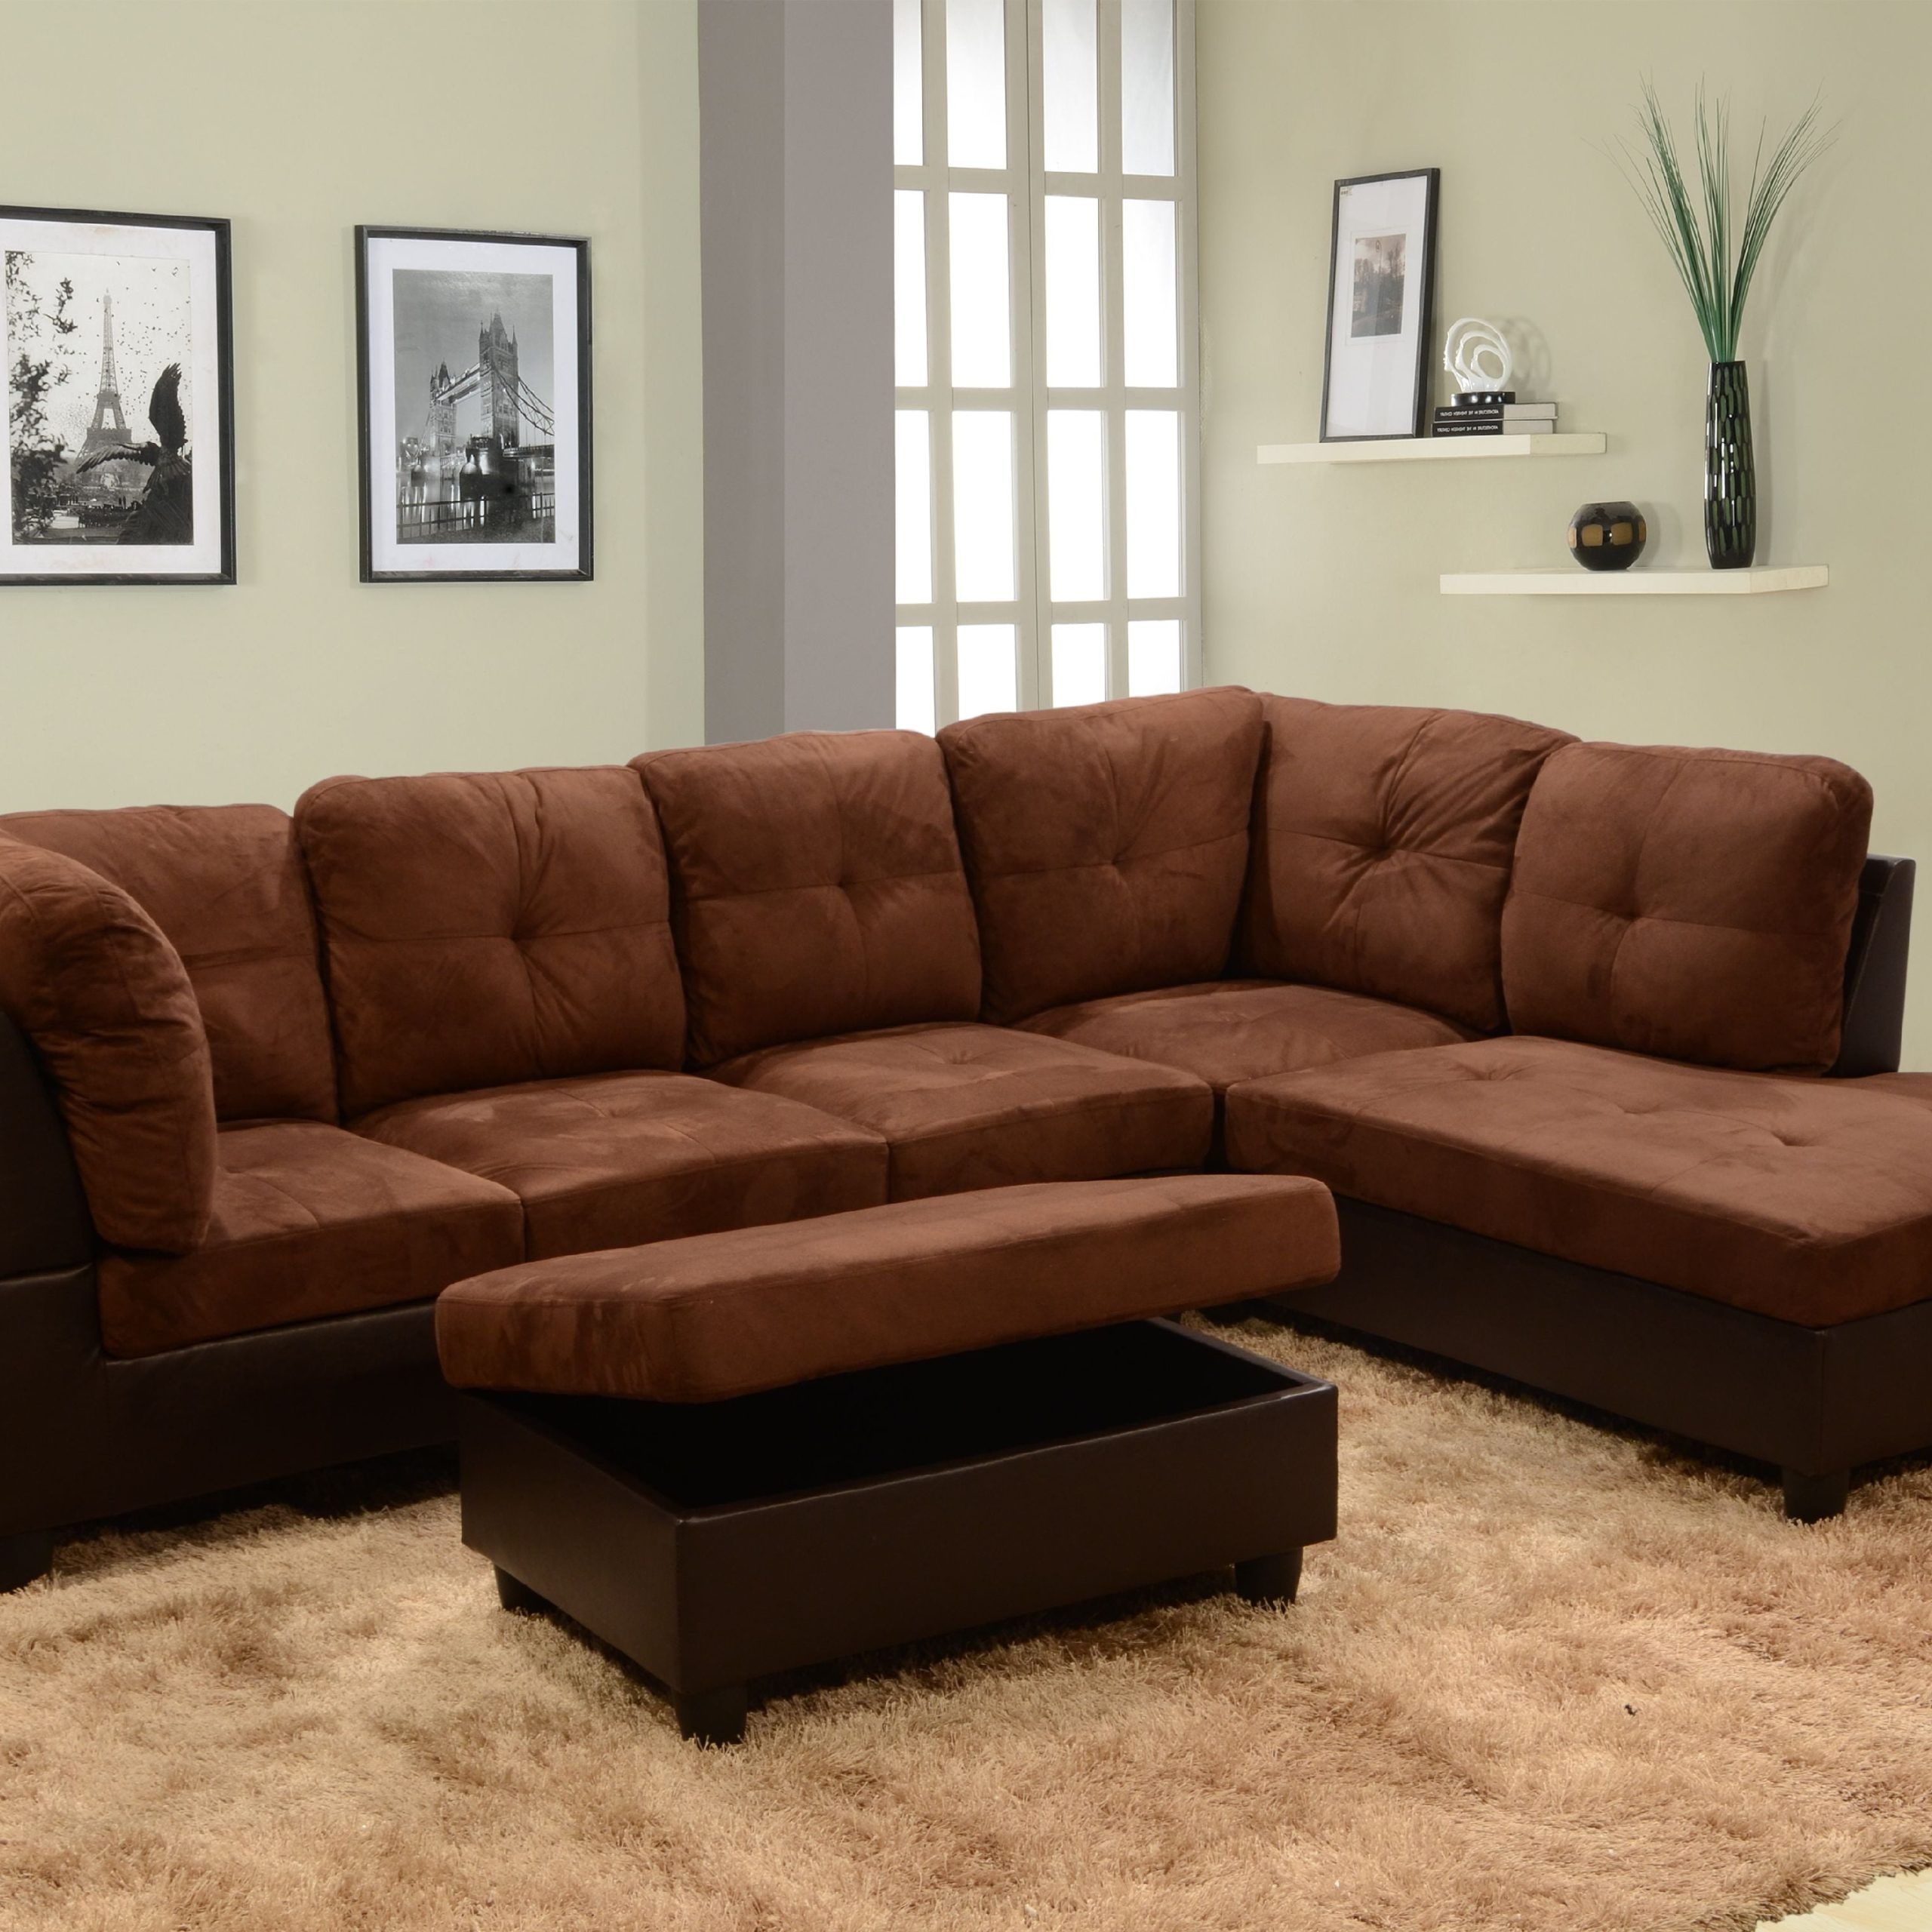 Matt Right Facing Sectional Sofa With Ottoman,chocolate – Walmart Regarding Sofas With Ottomans In Brown (Gallery 5 of 20)